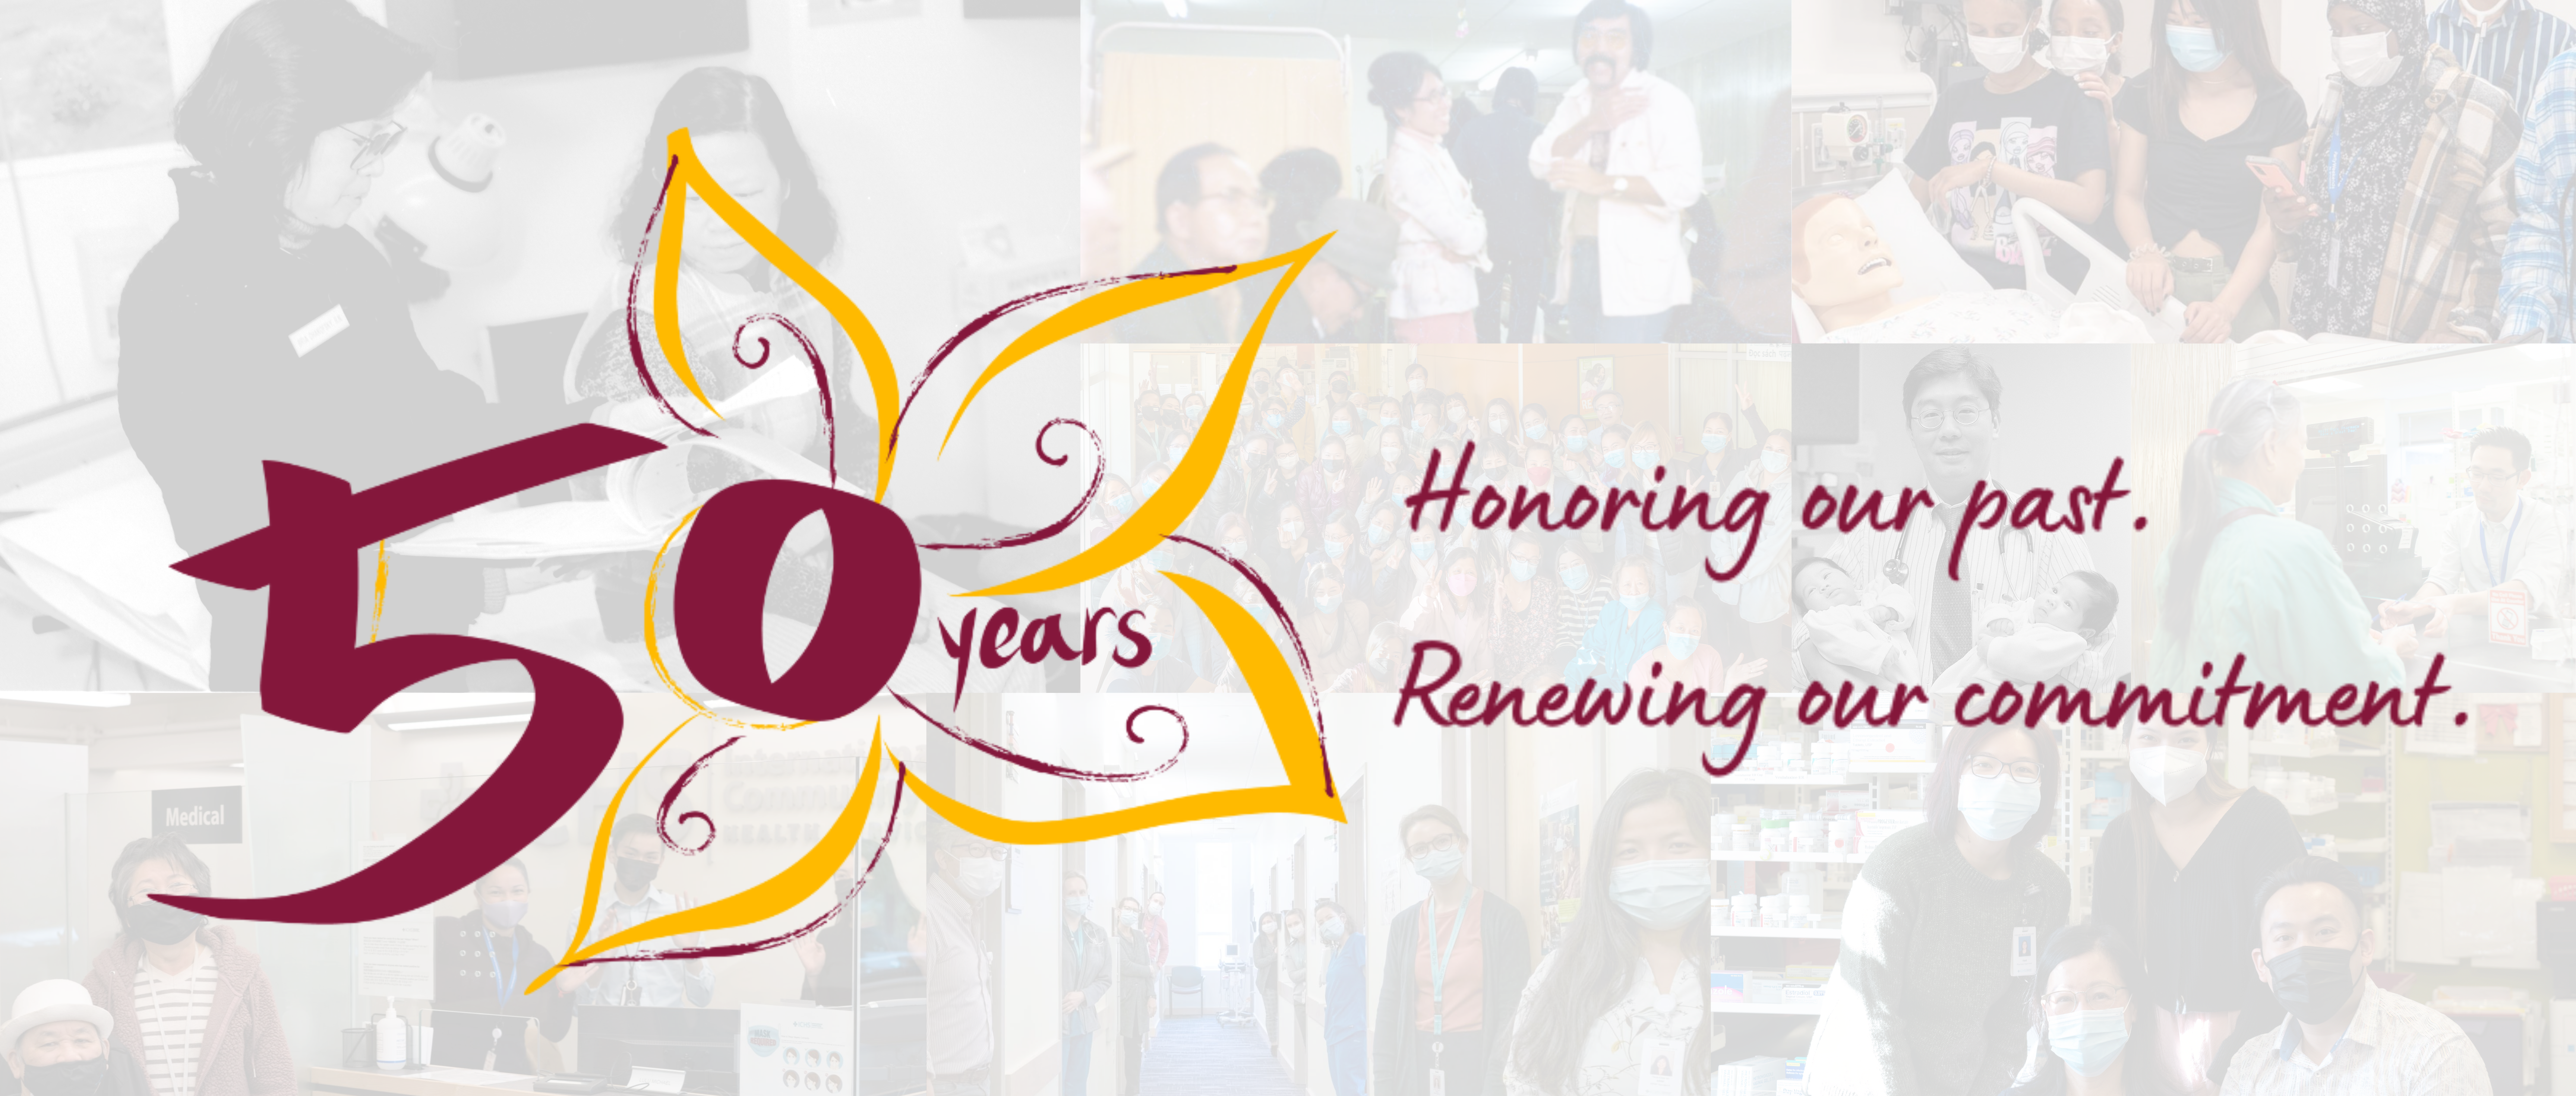 ICHS 50th Anniversary Logo: Honoring our past. Renewing our commitment.